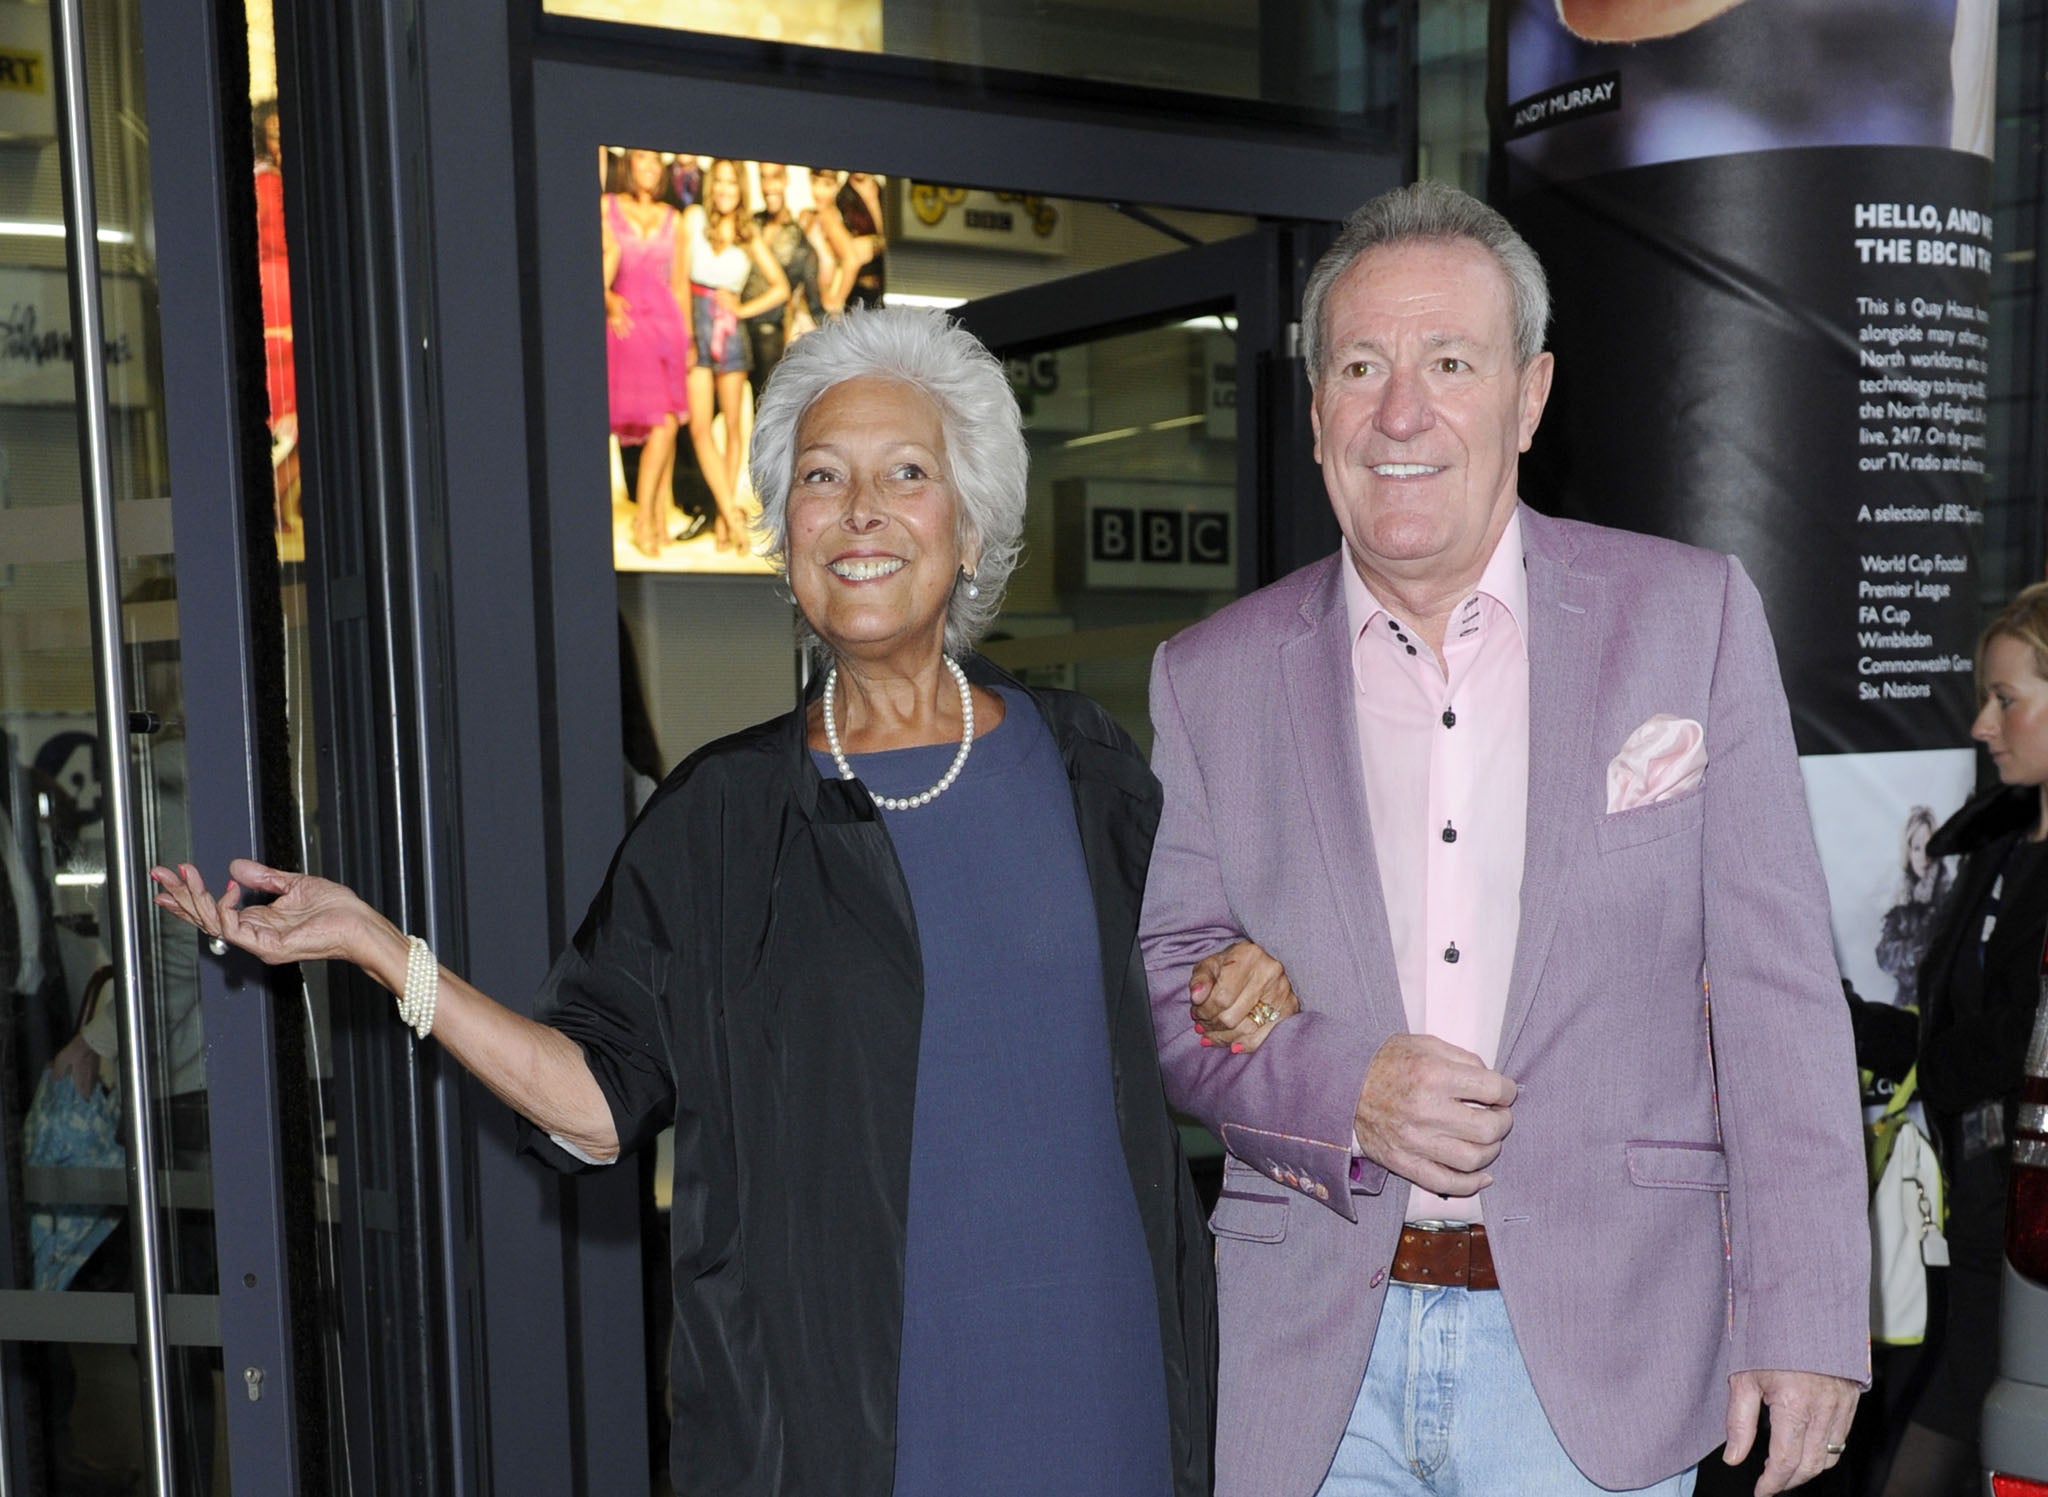 Lynda Bellingham and husband Michael Patteson outside the BBC Breakfast studios in Manchester on 7 October